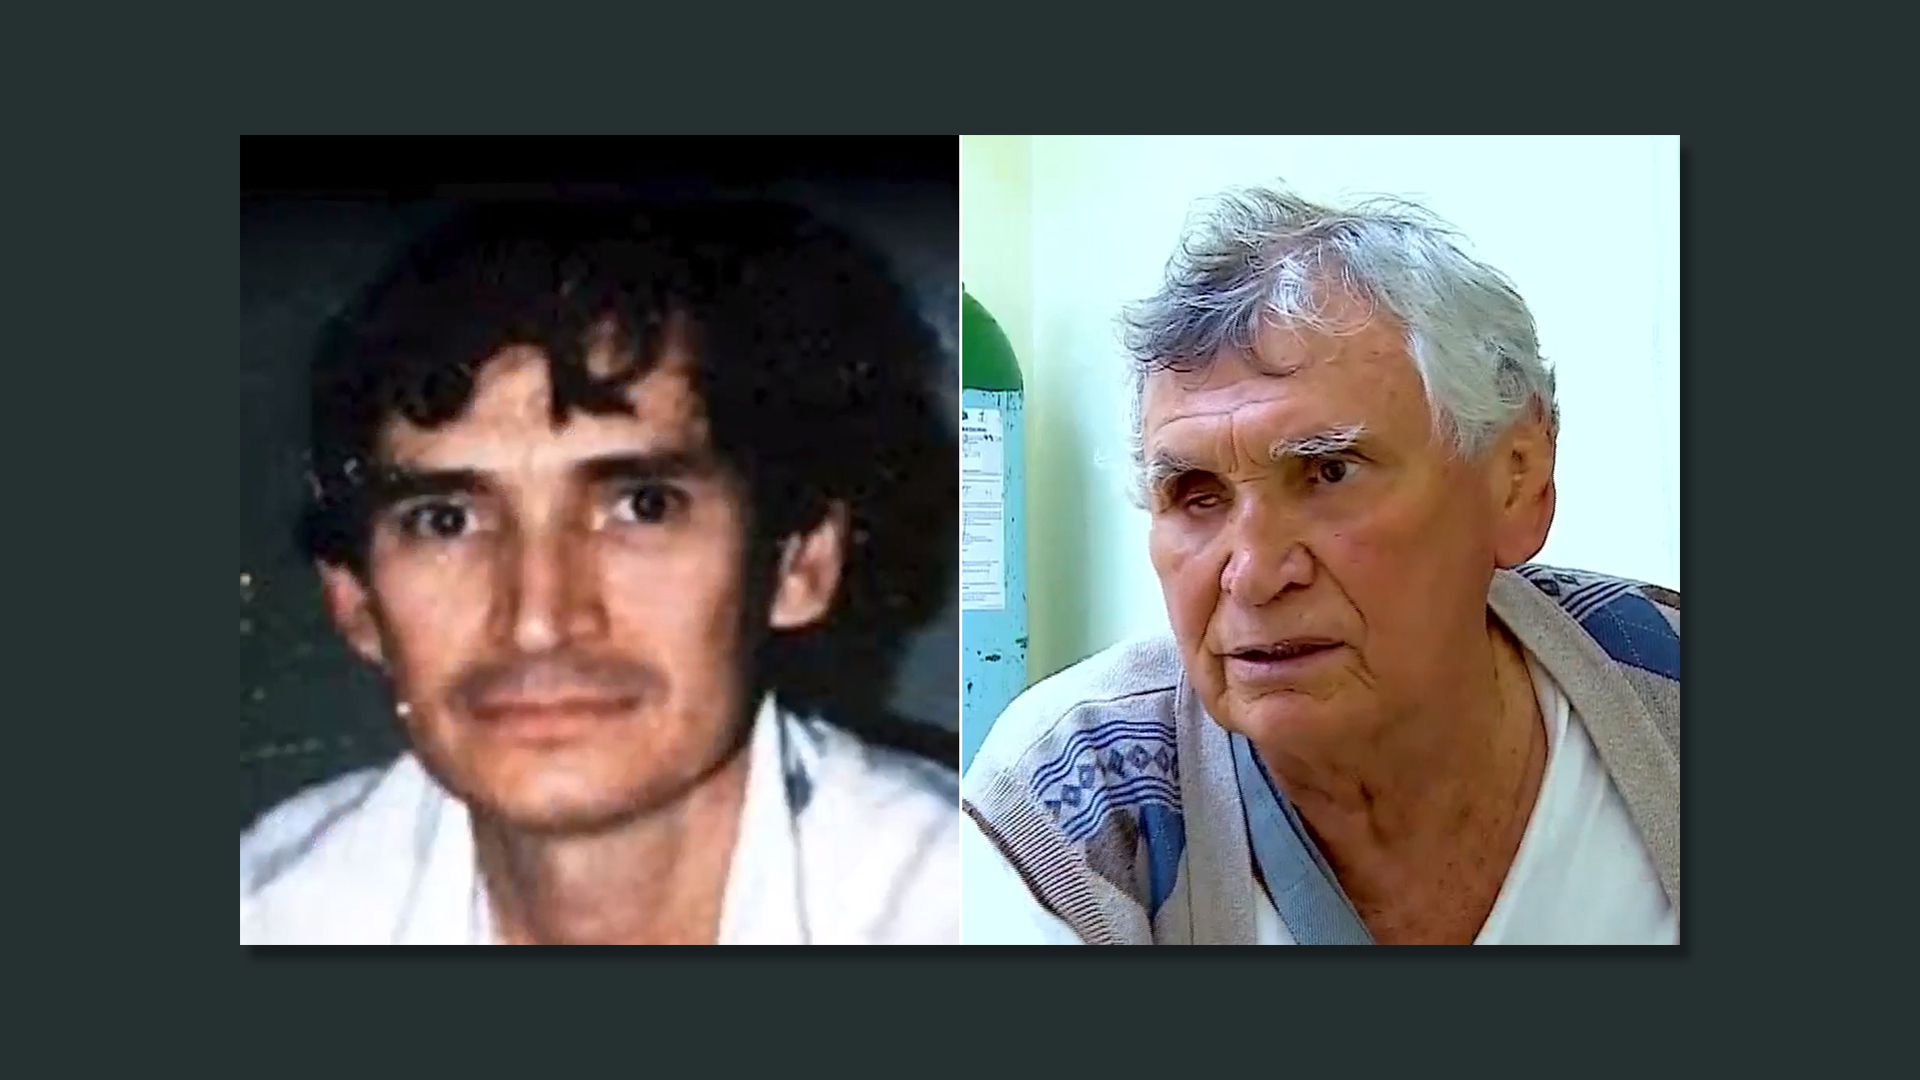 Miguel Ángel Félix Gallardo, former co-leader of the Guadalajara cartel, in the 1970s (right) and today. He has lost hearing in one ear, sight in one eye and needs an oxygen tank to breathe. 